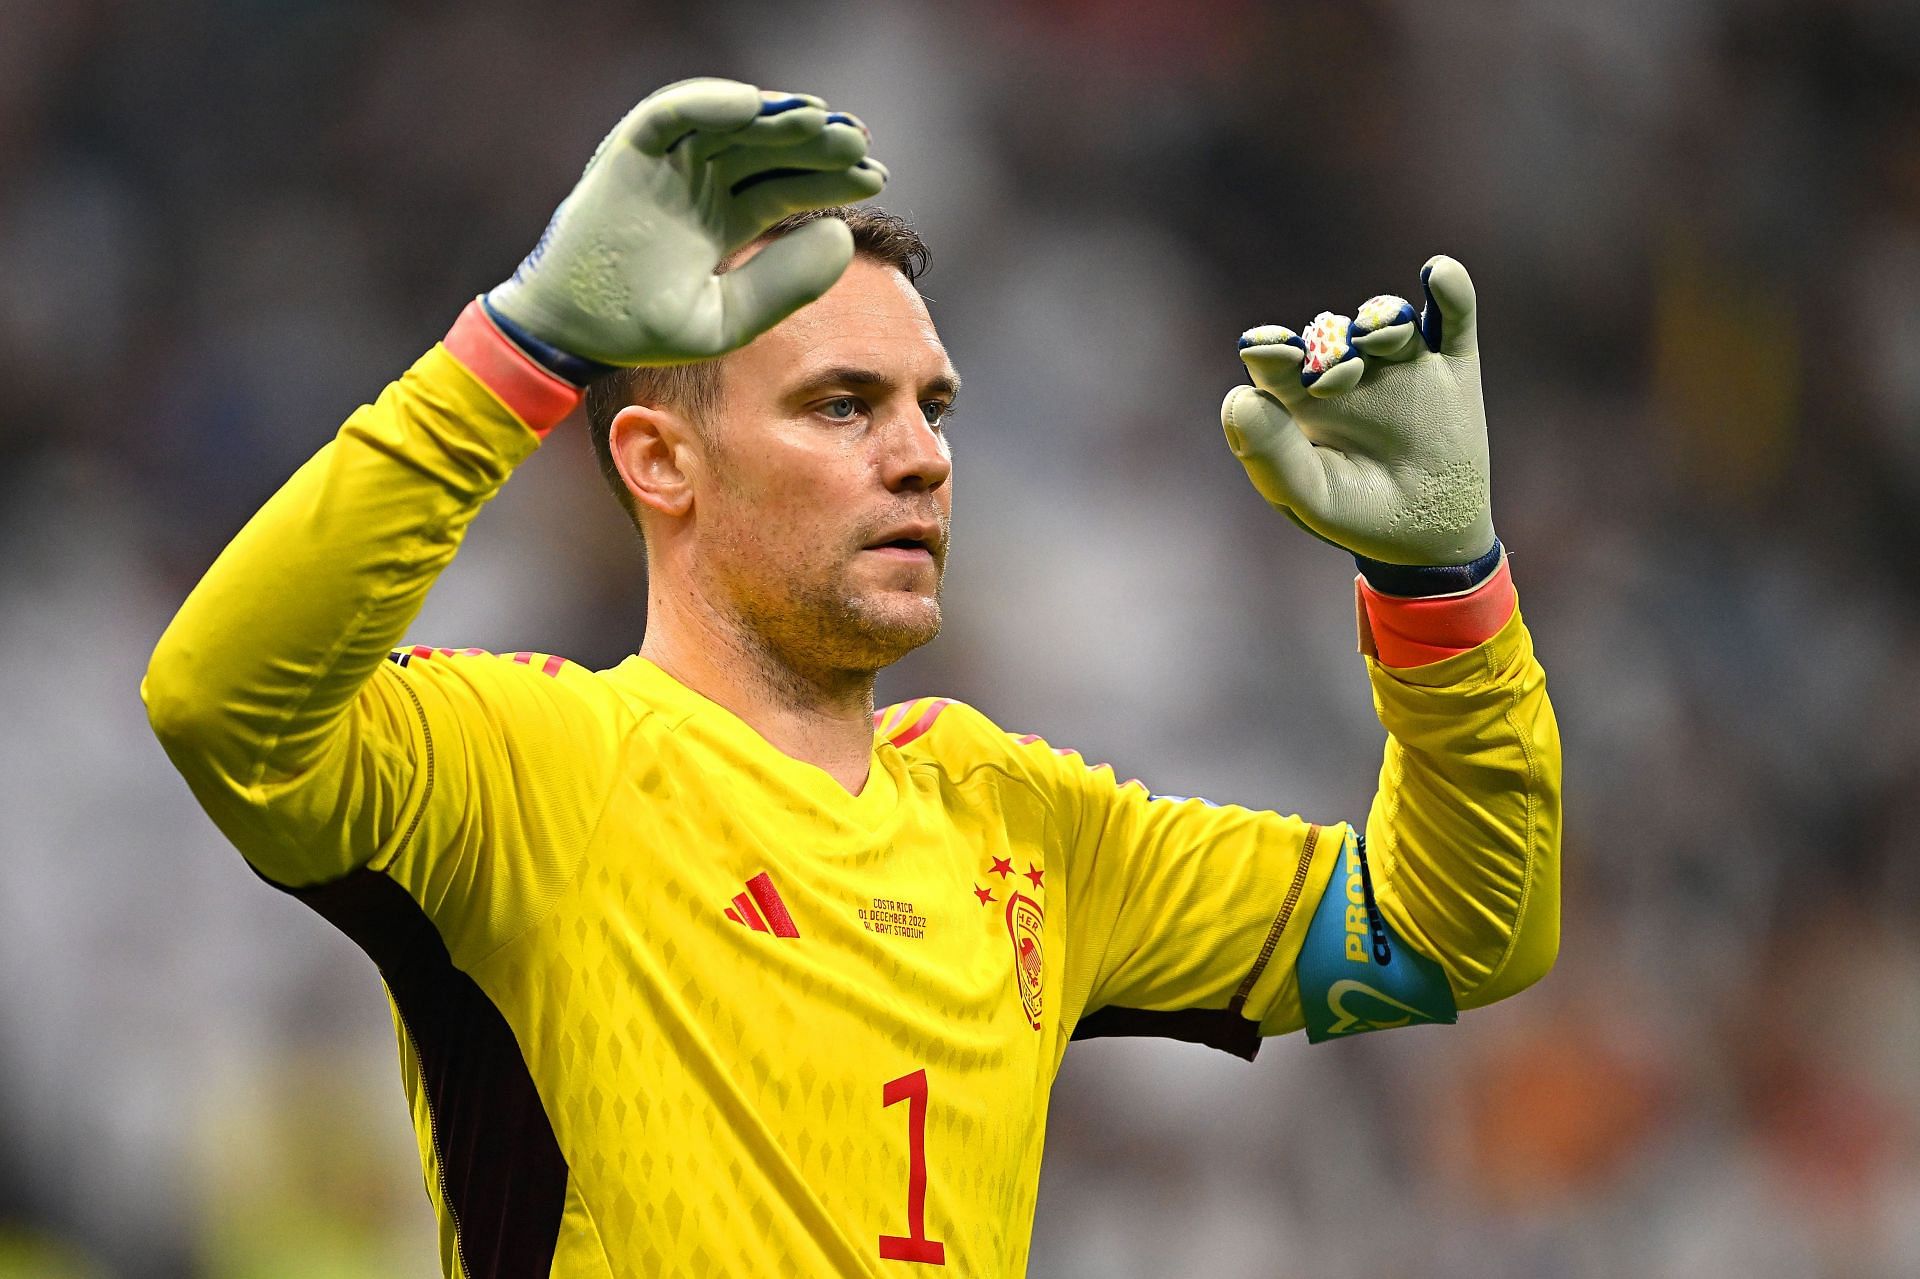 Manuel Neuer endured a disappointing 2022 FIFA World Cup campaign with Germany